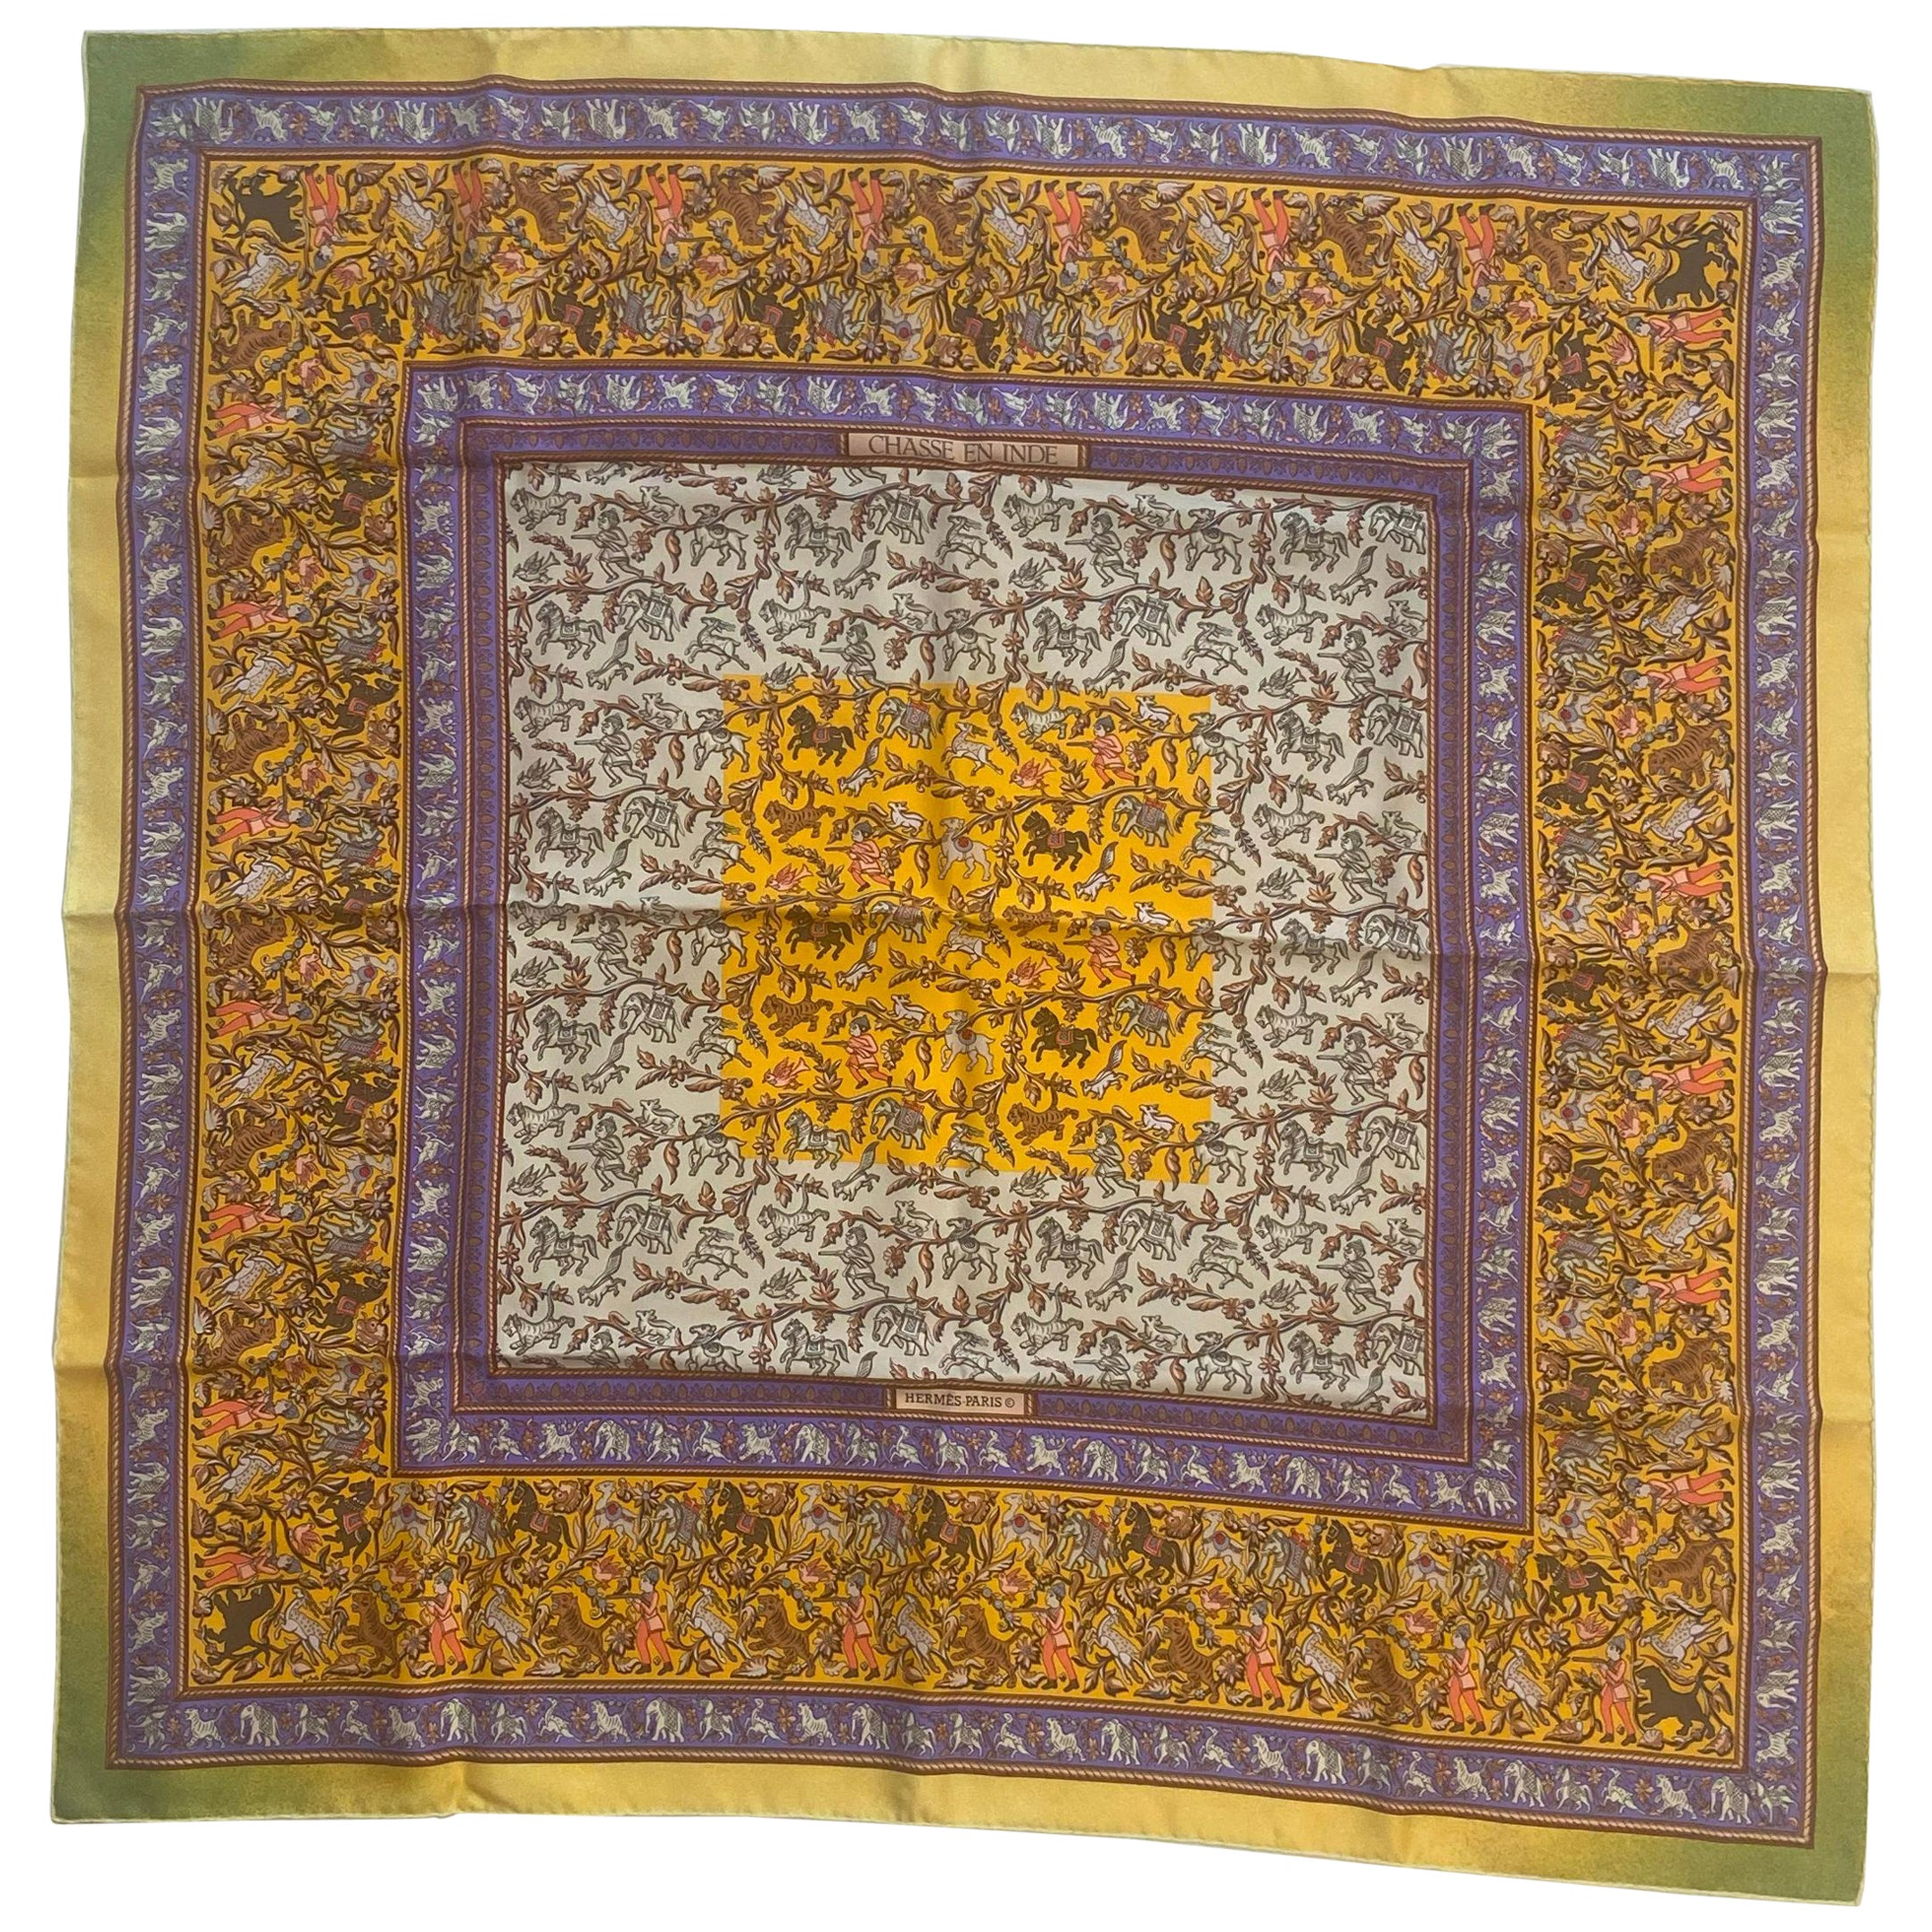 Hermes Chasse en Inde Silk Twill Scarf Designed by Michele Duchene 35" X 35" For Sale